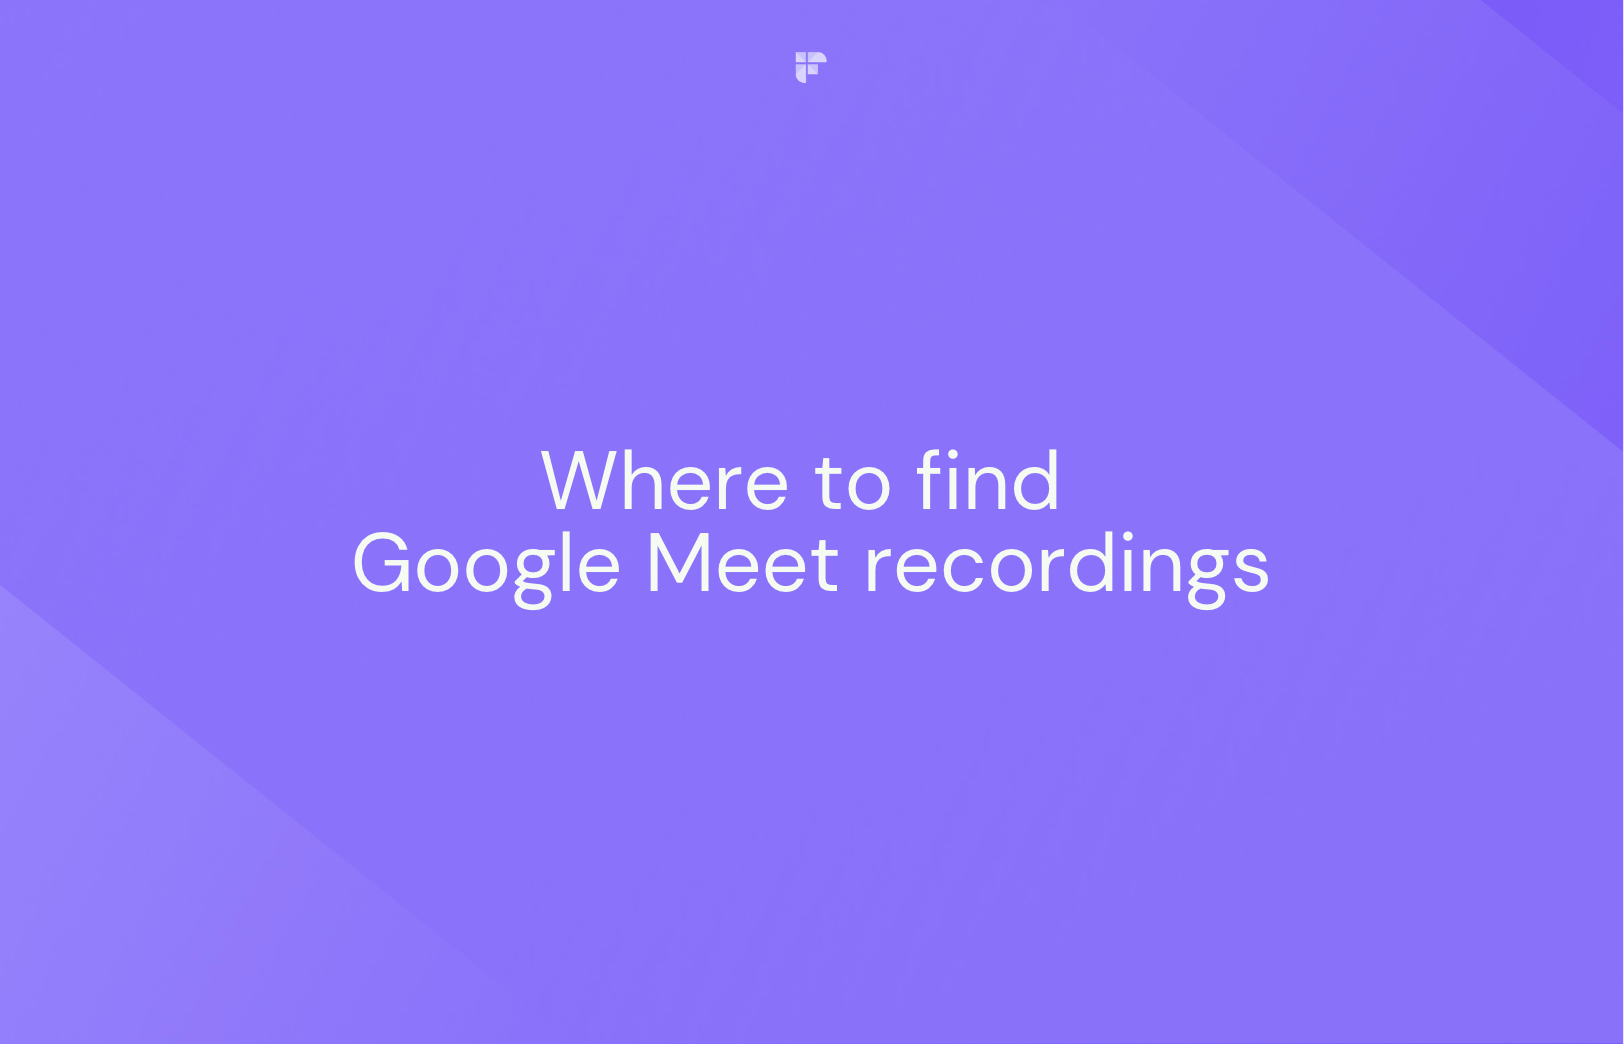 How To Find Google Meet Recordings Recordings?